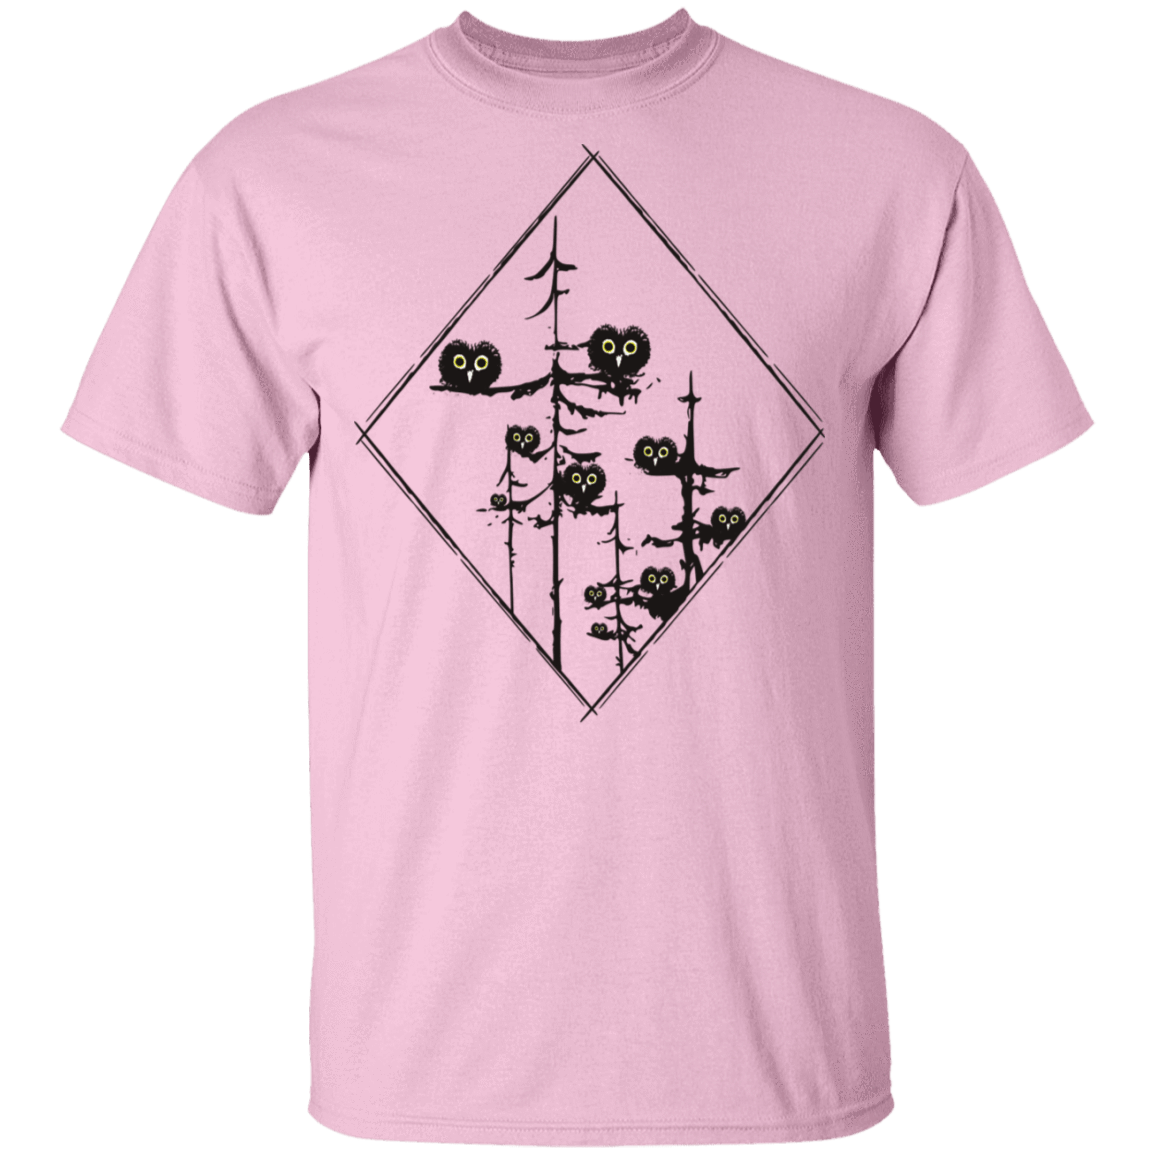 T-Shirts Light Pink / S Who Forest T-Shirt